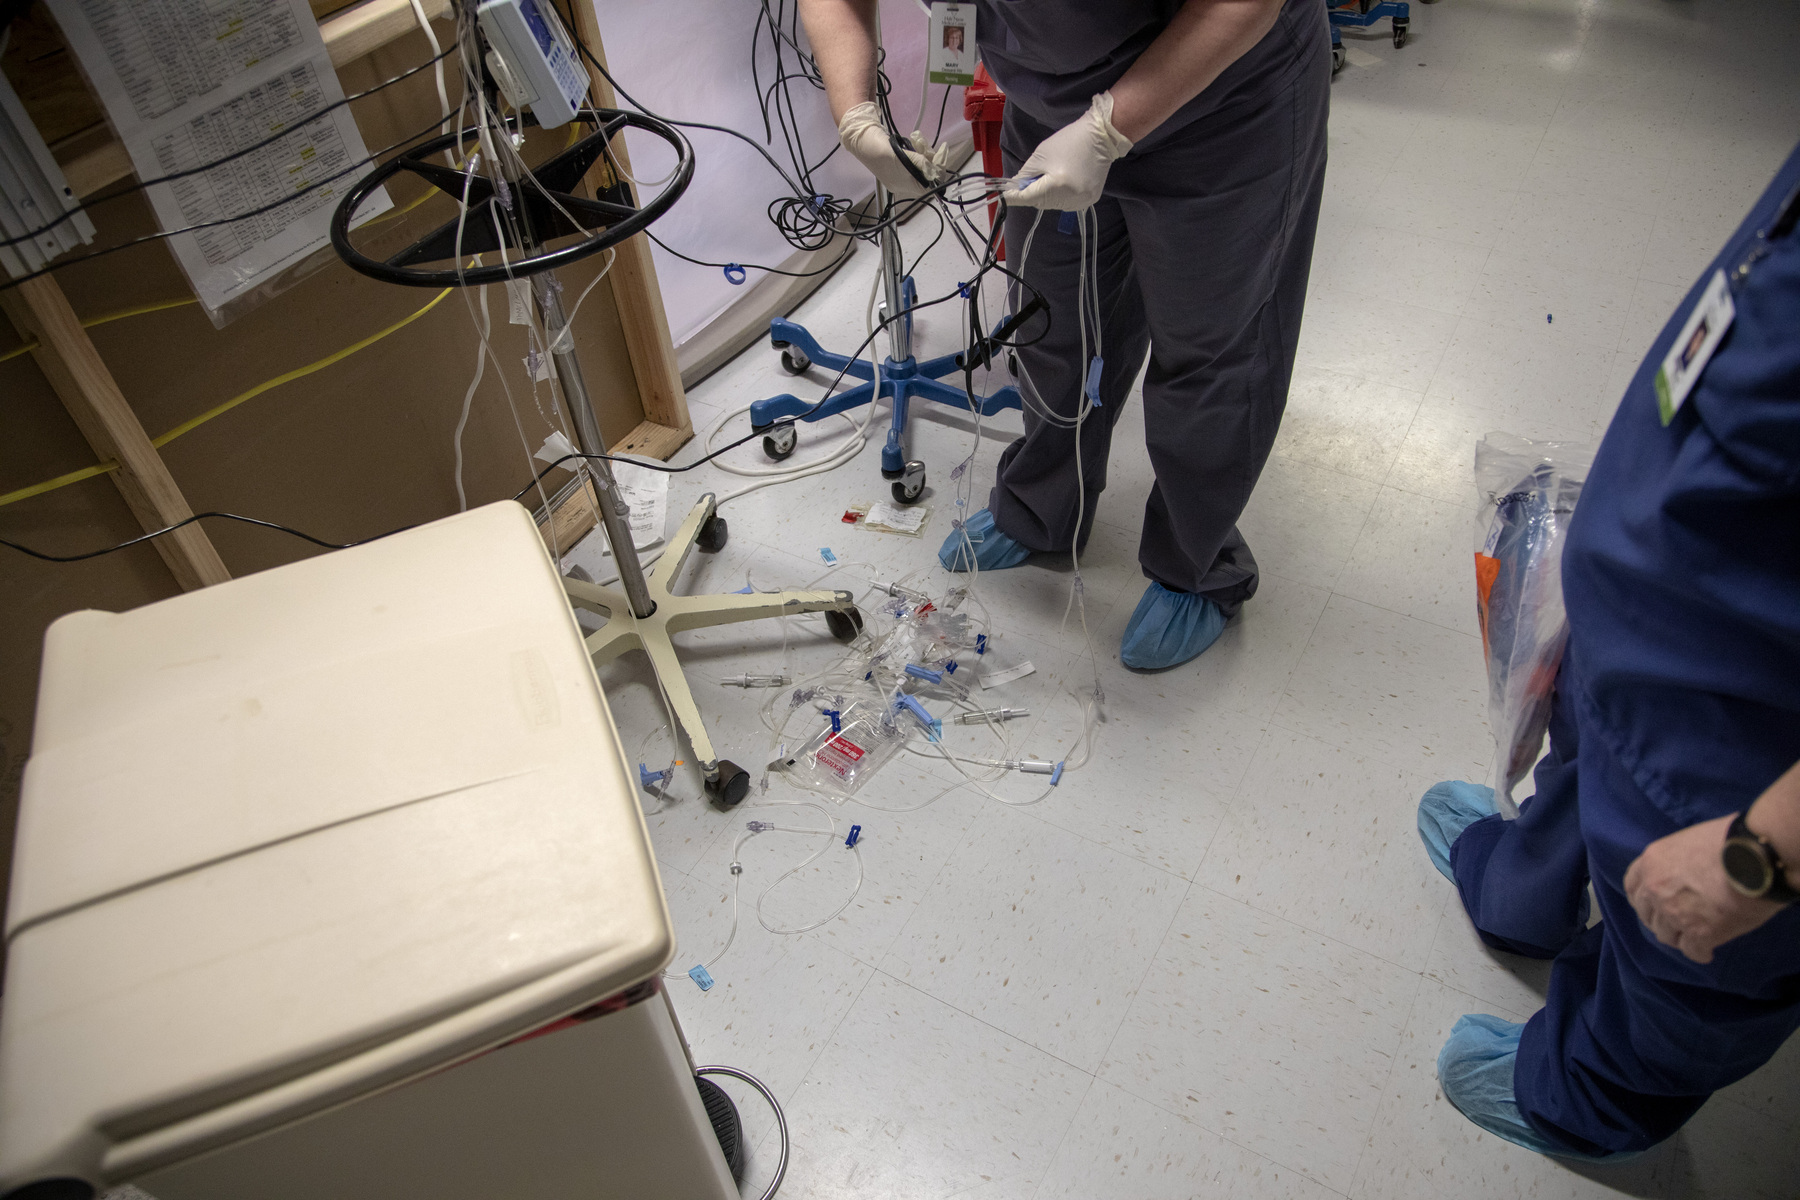 An IV pole following life saving measures  in the ICU during the COVID-19 pandemic. 4/23/2020 Photo by Jeff Rhode